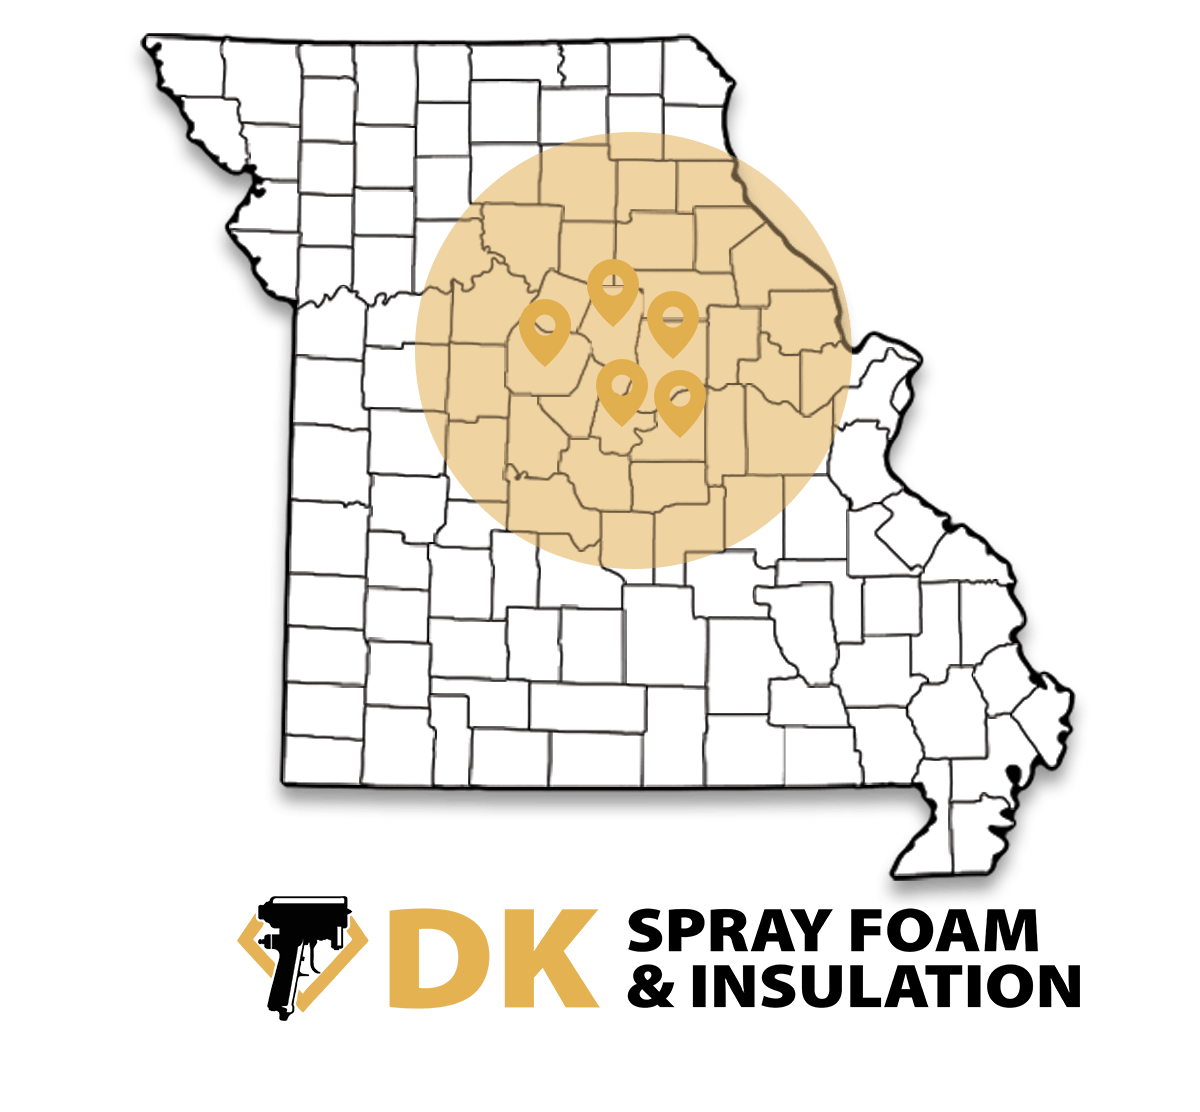 Find DK Spray Foam & Insulation on the Map in the Fulton, MO Area for Quality Insulation Service!